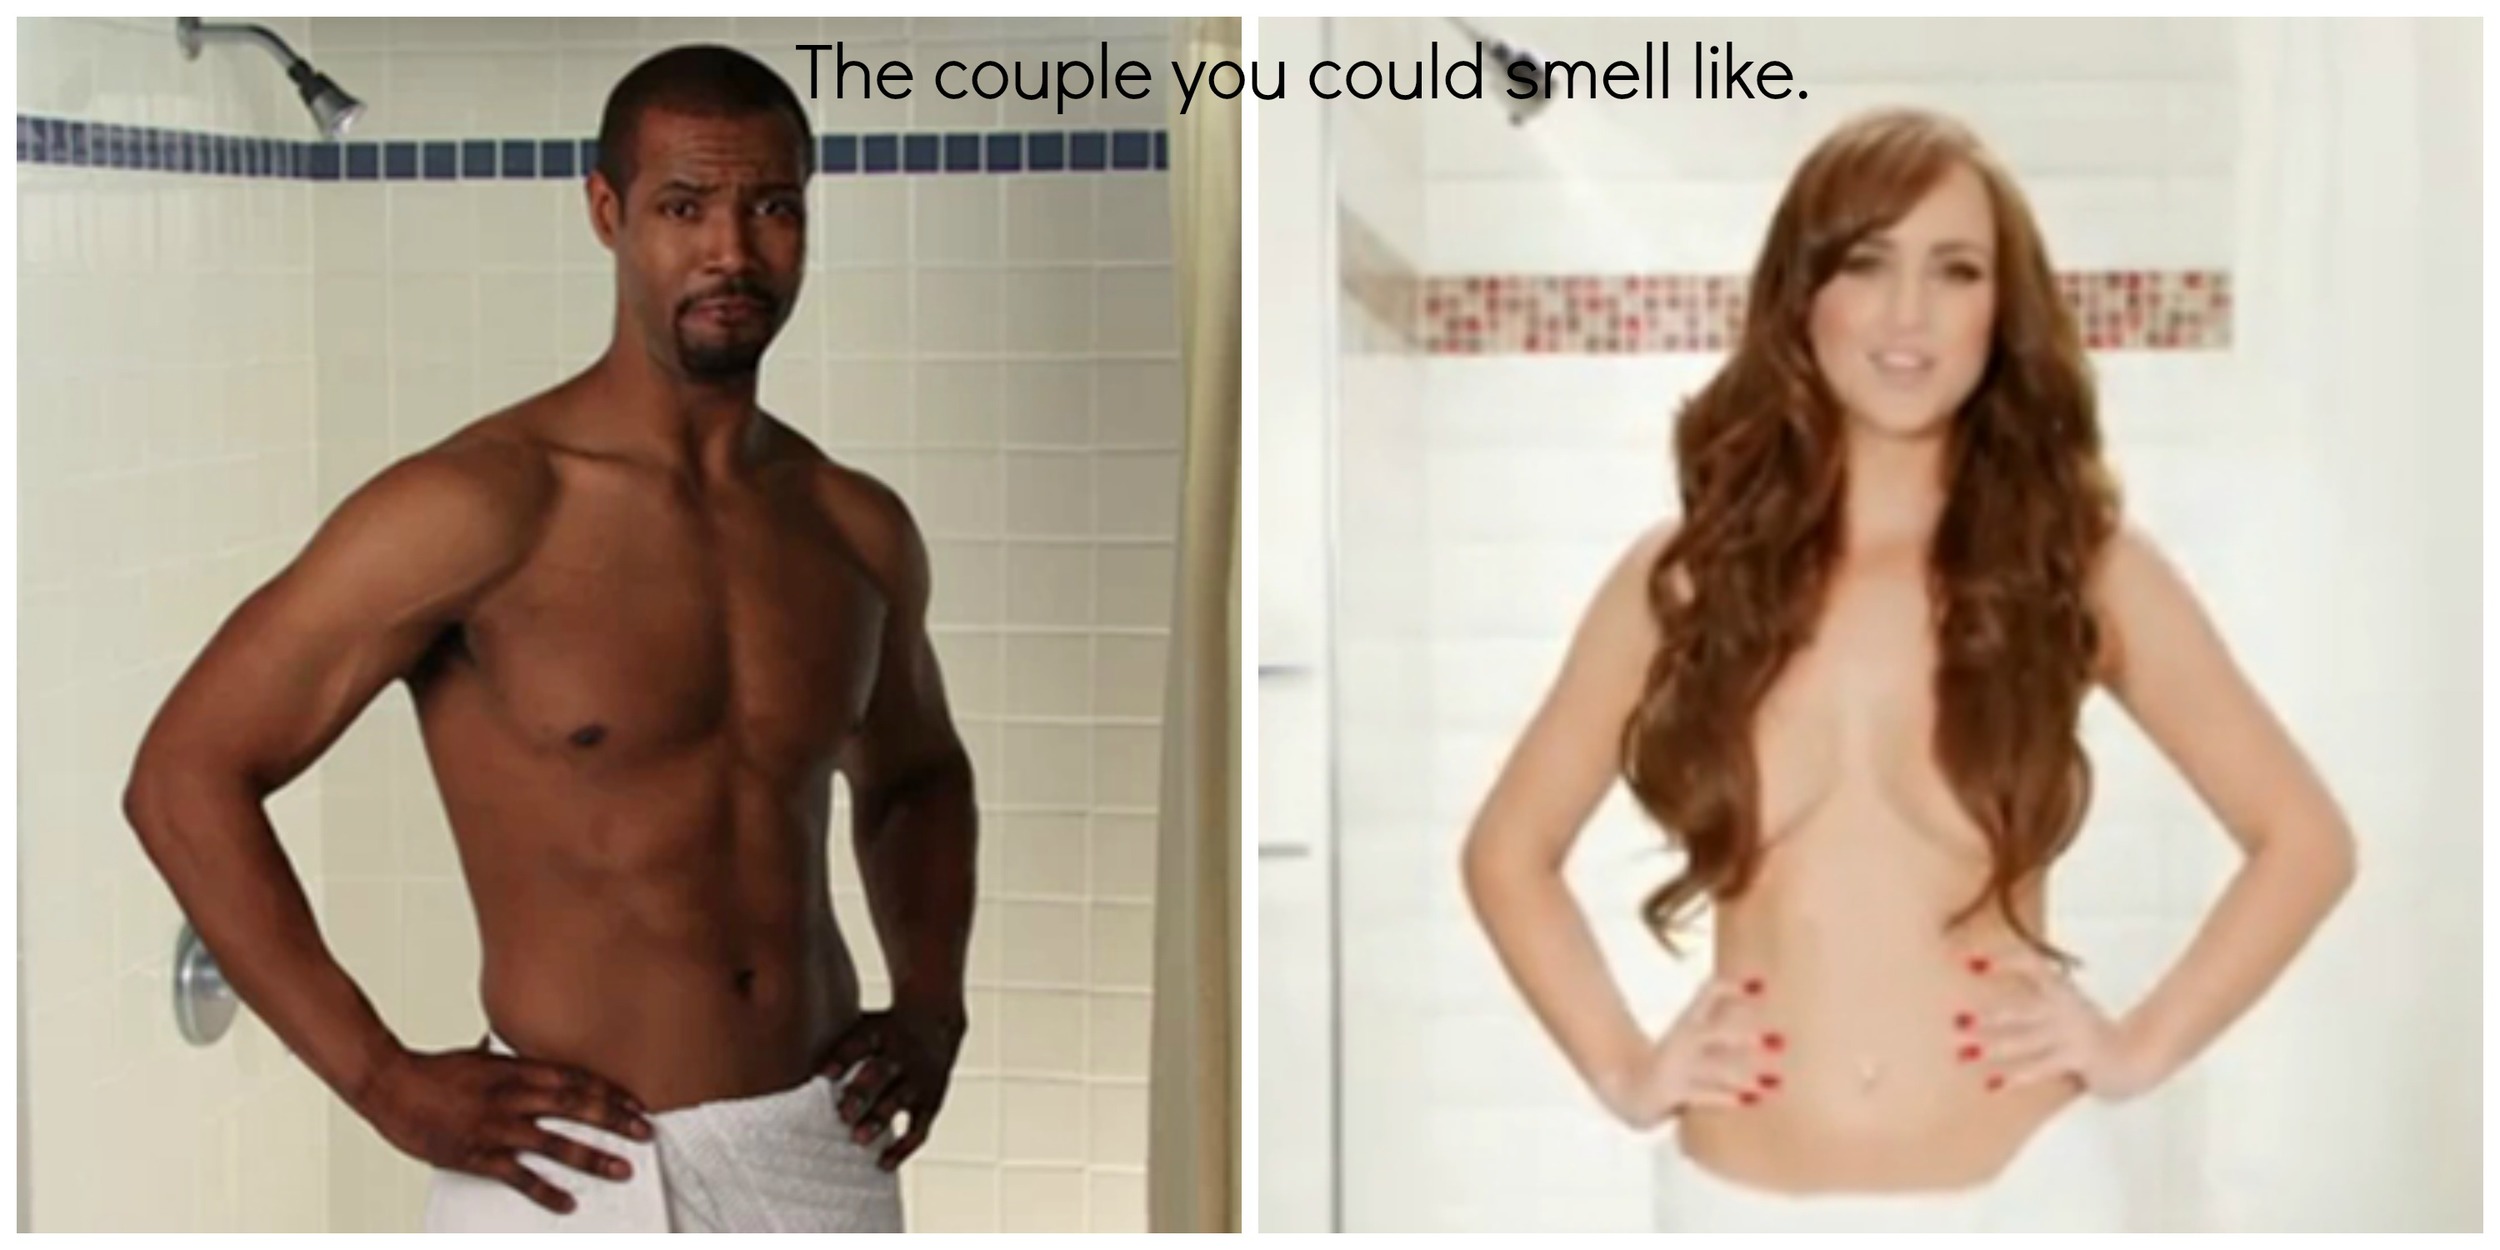 old spice ad campaign analysis